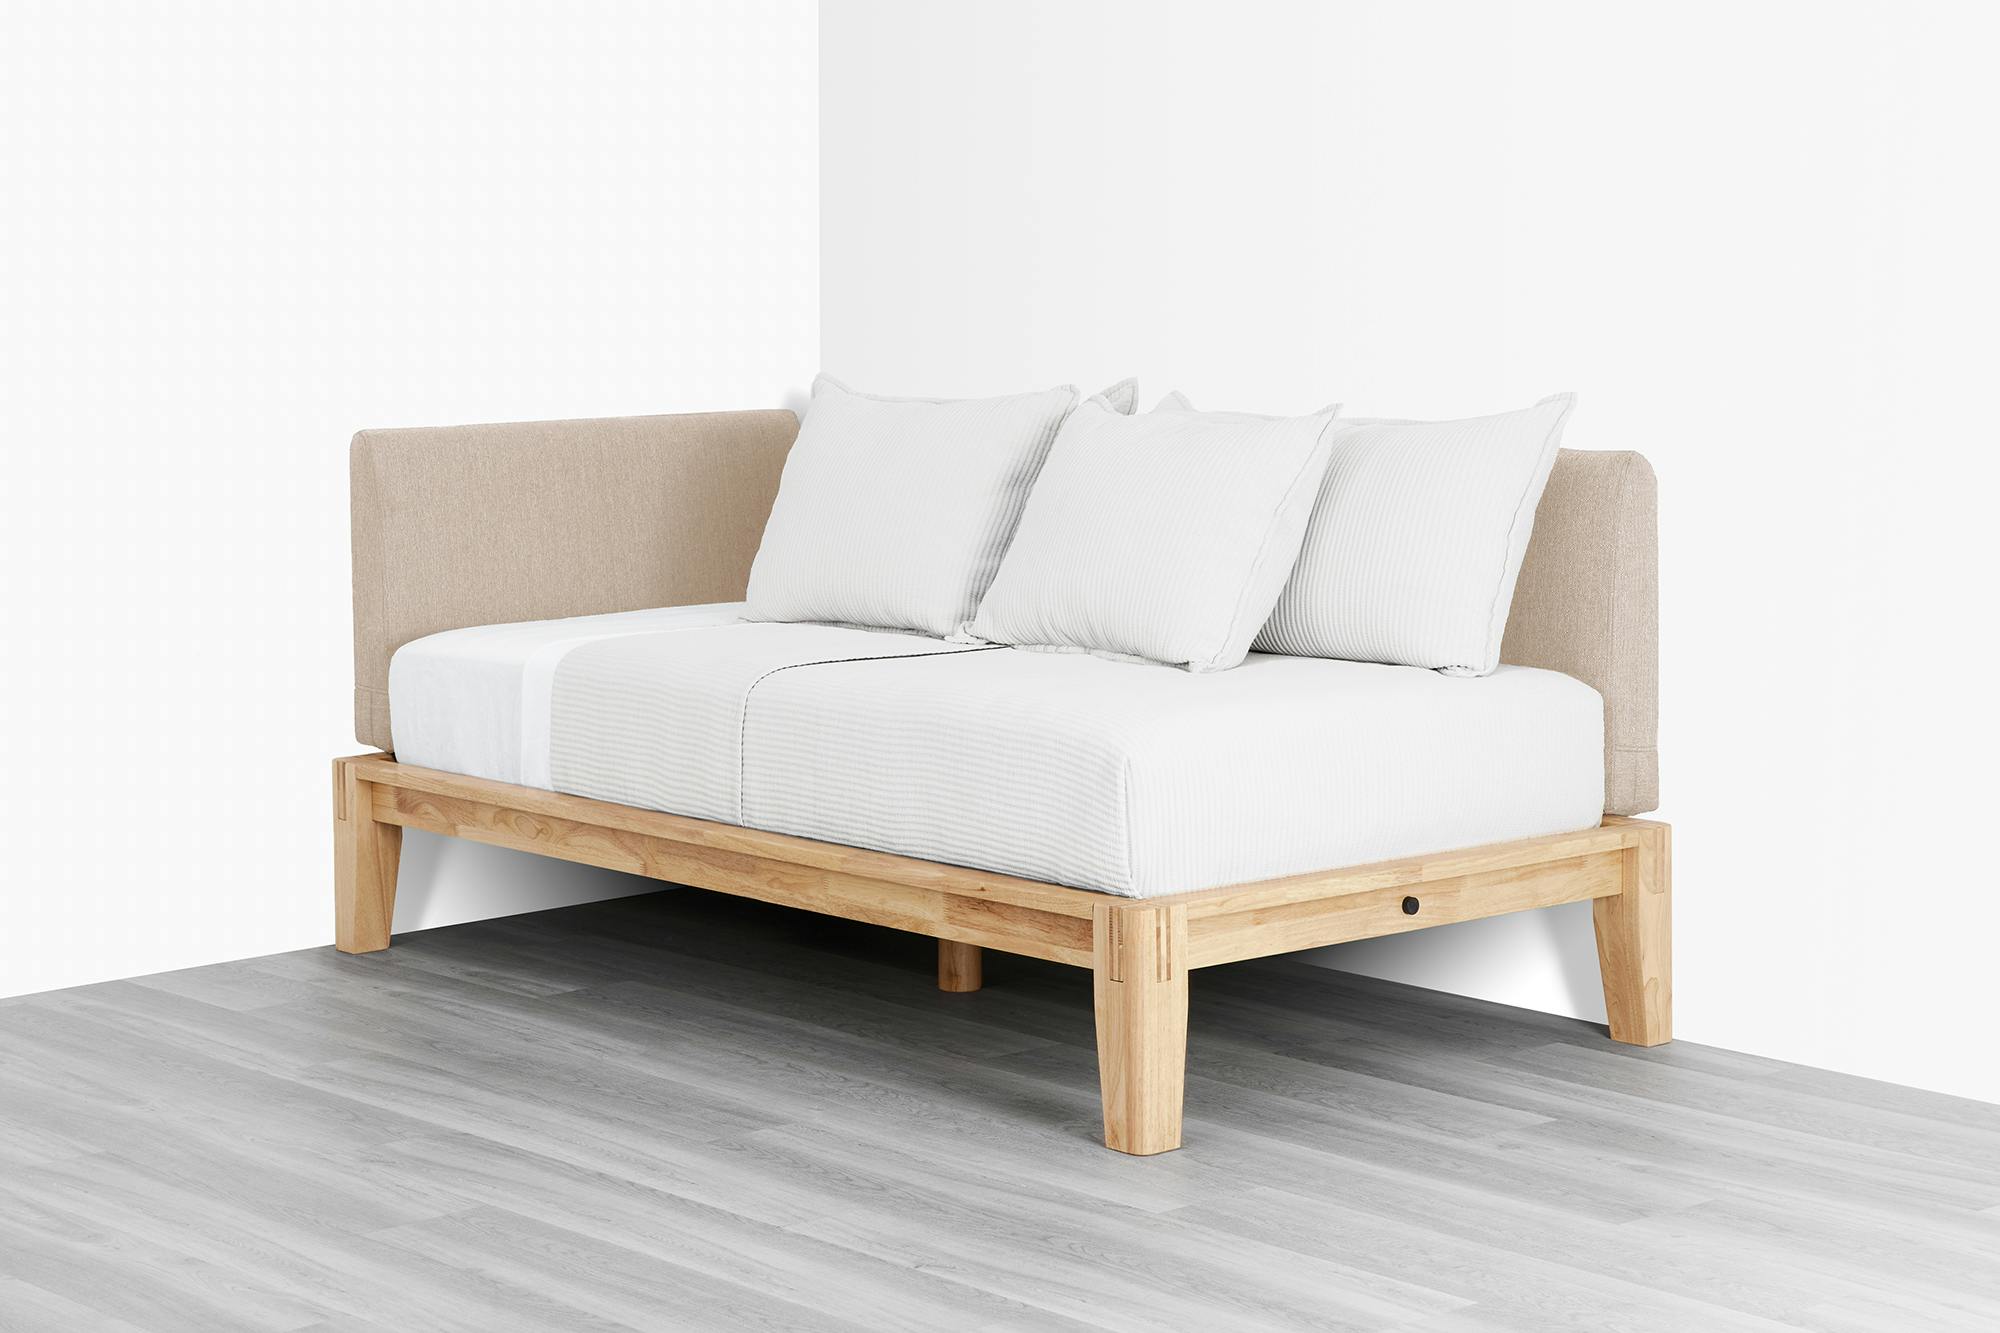 PDP Image: The Daybed (Natural / Dune) - 3:2 - Pillow, Stacked